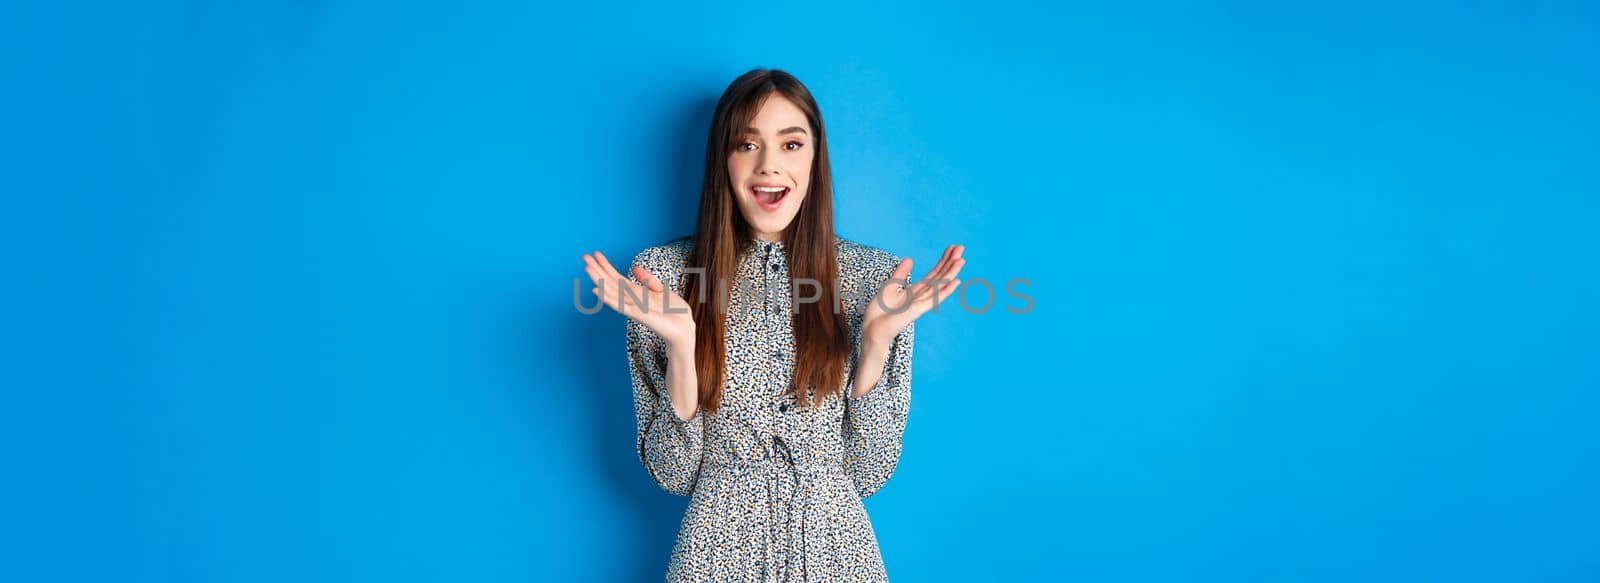 Excited beautiful woman clap hands and congratulate you, praising nice work, applause at camera and smiling, standing on blue background.